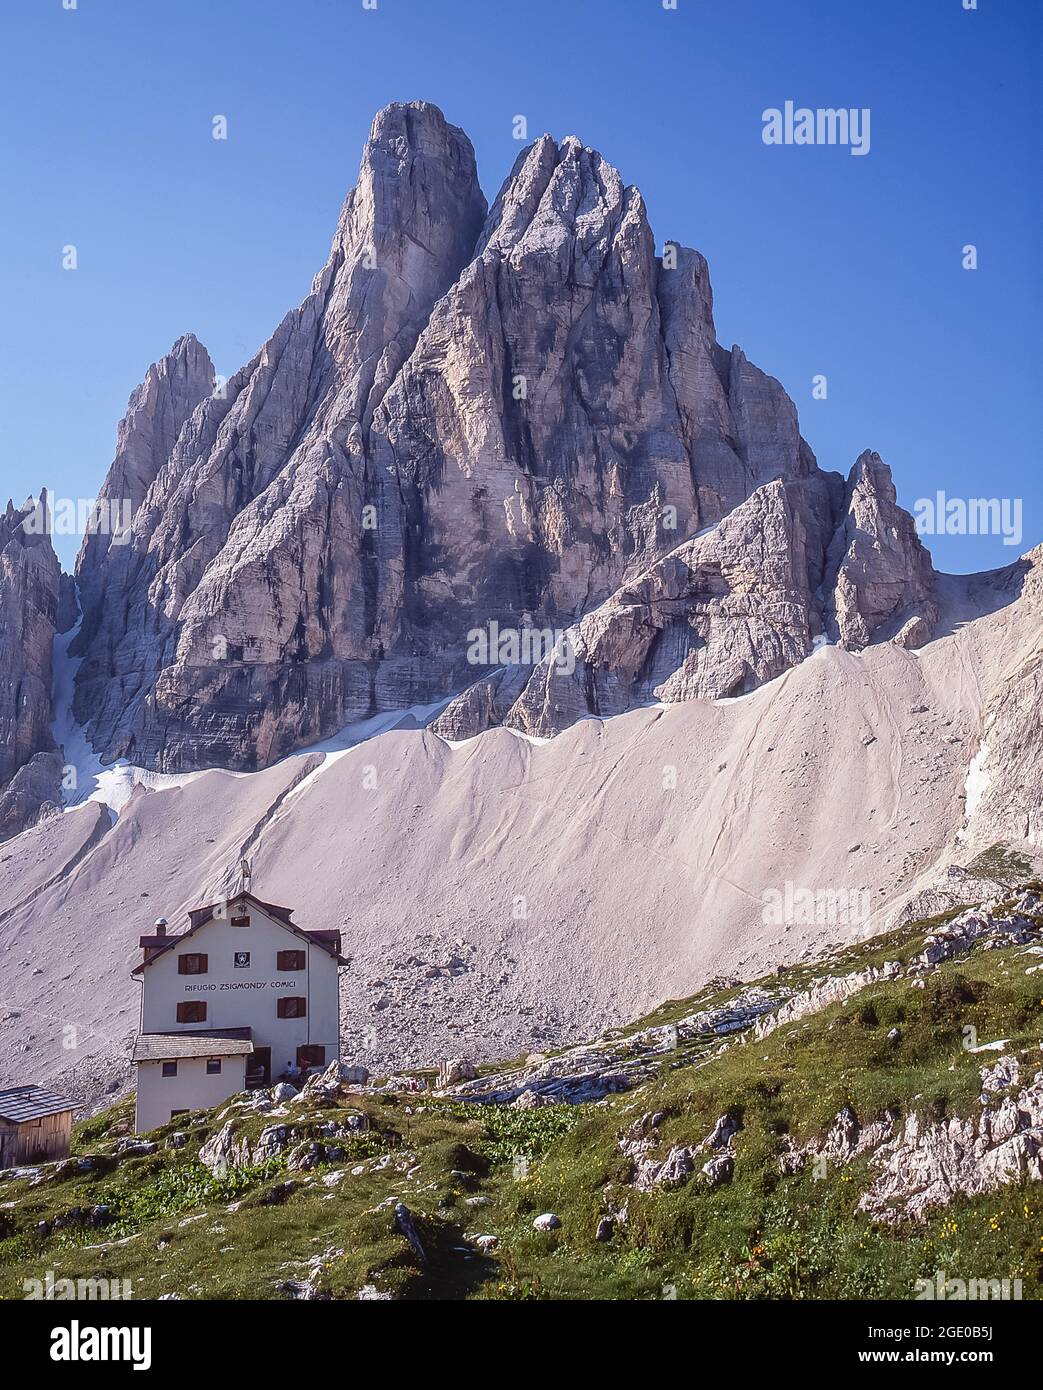 This is the Italian Alpine Club CAI owned Rifugio Comici-Zsigmondy mountain refuge with the formidable peak of the Zwolferkogel in the Sexton-Sesto Dolomites region of the Italian Dolomites, the Alto Adige of the Sud Tyrol not far from the resort town of Cortina d'Ampezzo Stock Photo